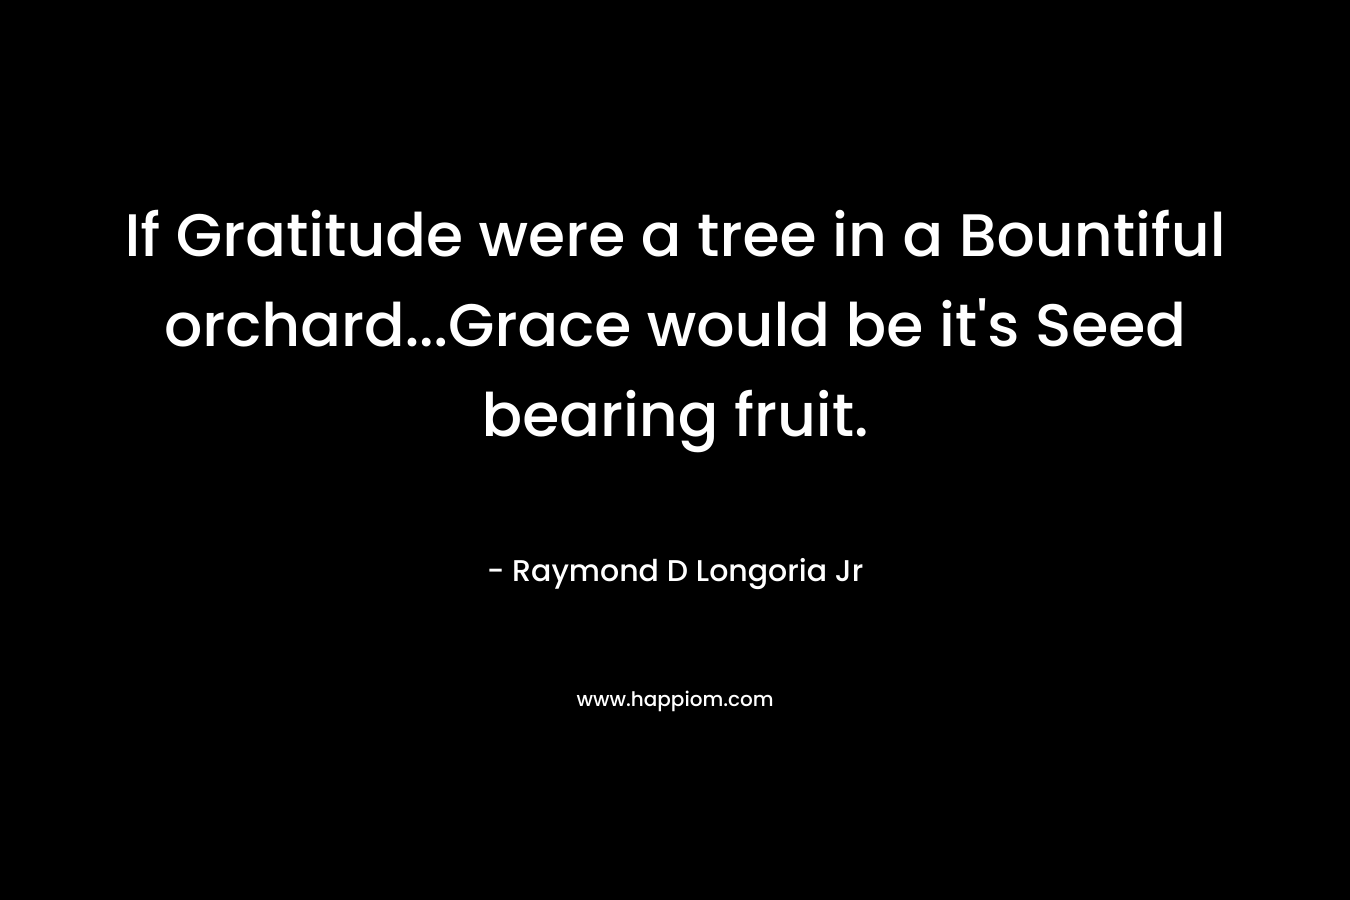 If Gratitude were a tree in a Bountiful orchard...Grace would be it's Seed bearing fruit.